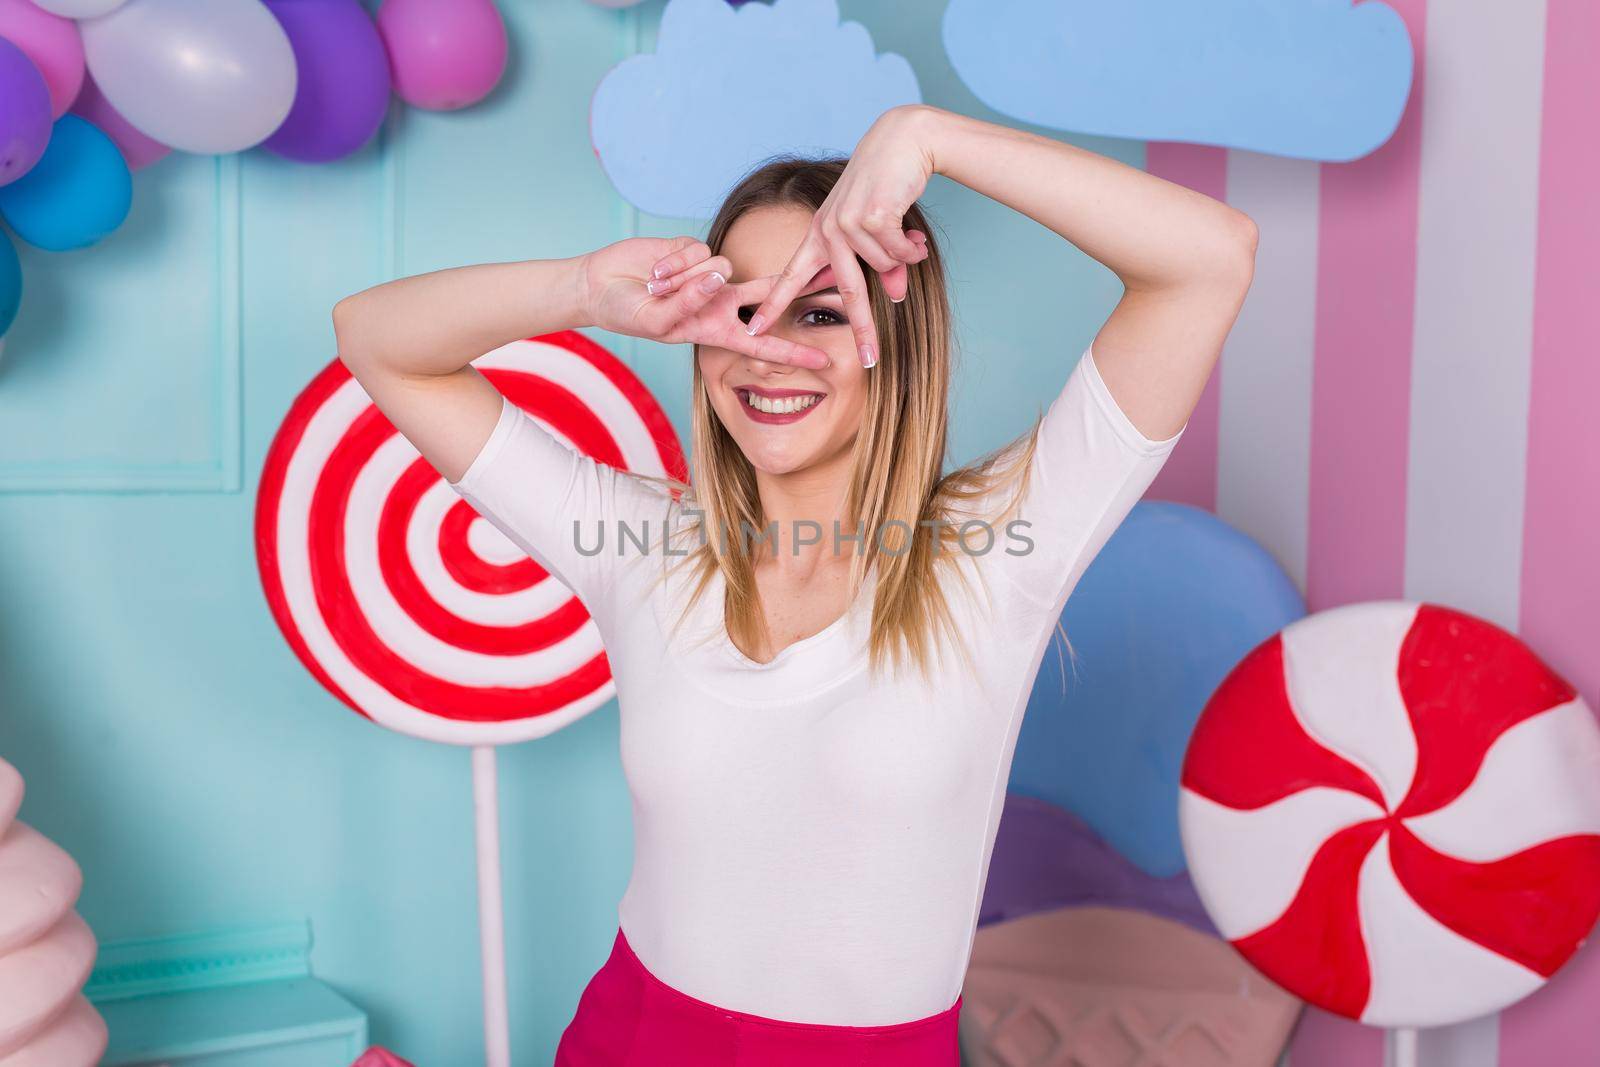 Portrait of joyful young woman in pink dress on background decorated with huge candies and ice cream by StudioPeace